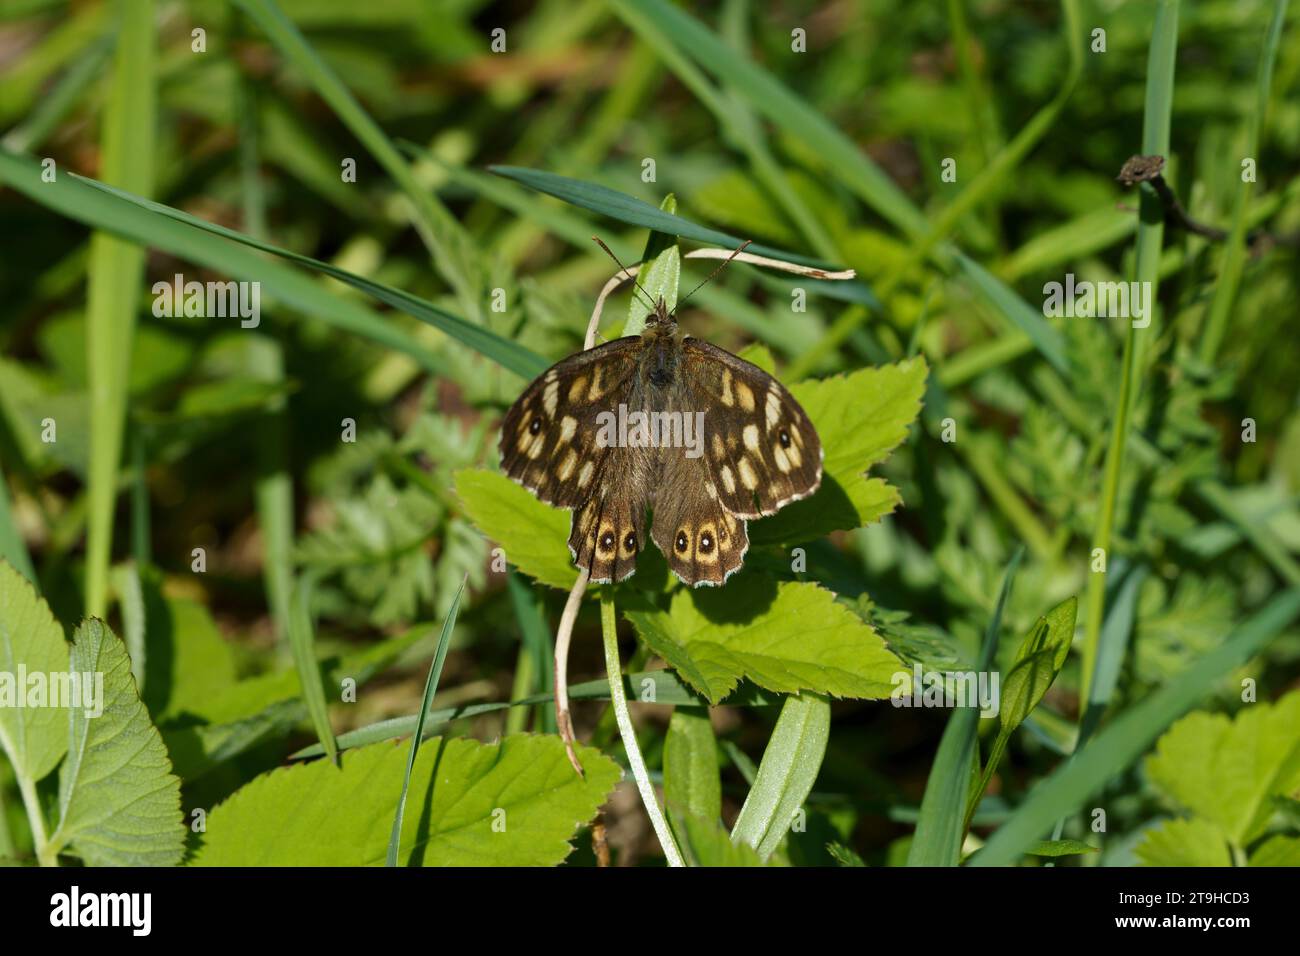 Pararge aegeria Family Nymphalidae Genus Pararge Speckled wood butterfly wild nature insect wallpaper, picture, photography Stock Photo